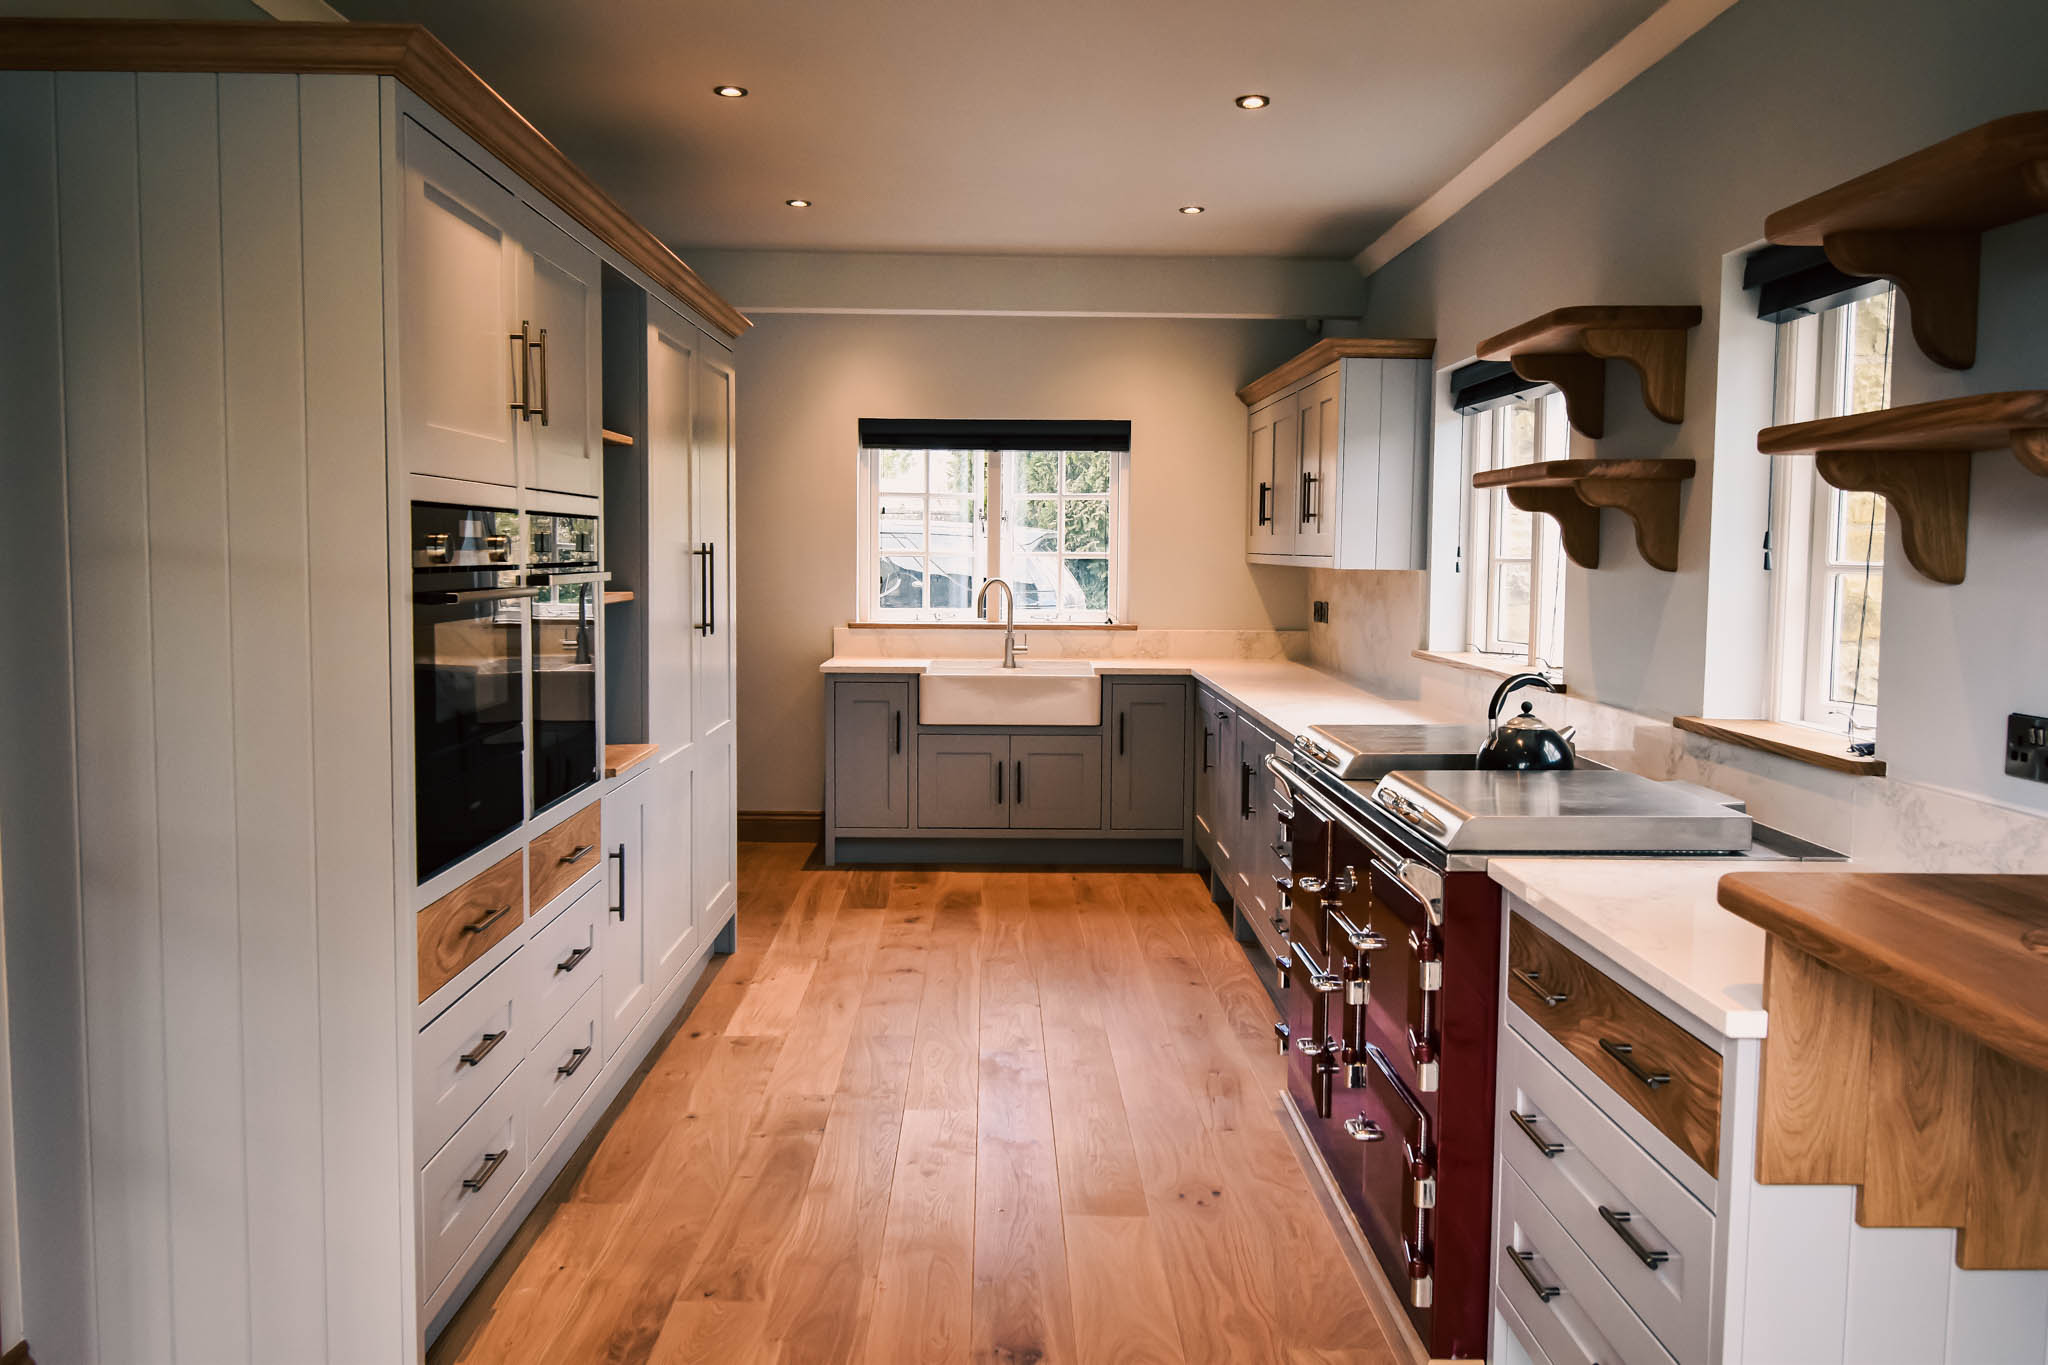 Made to measure joinery Skipton. Handmade kitchens with bespoke design service. Property Renovations North Yorkshire